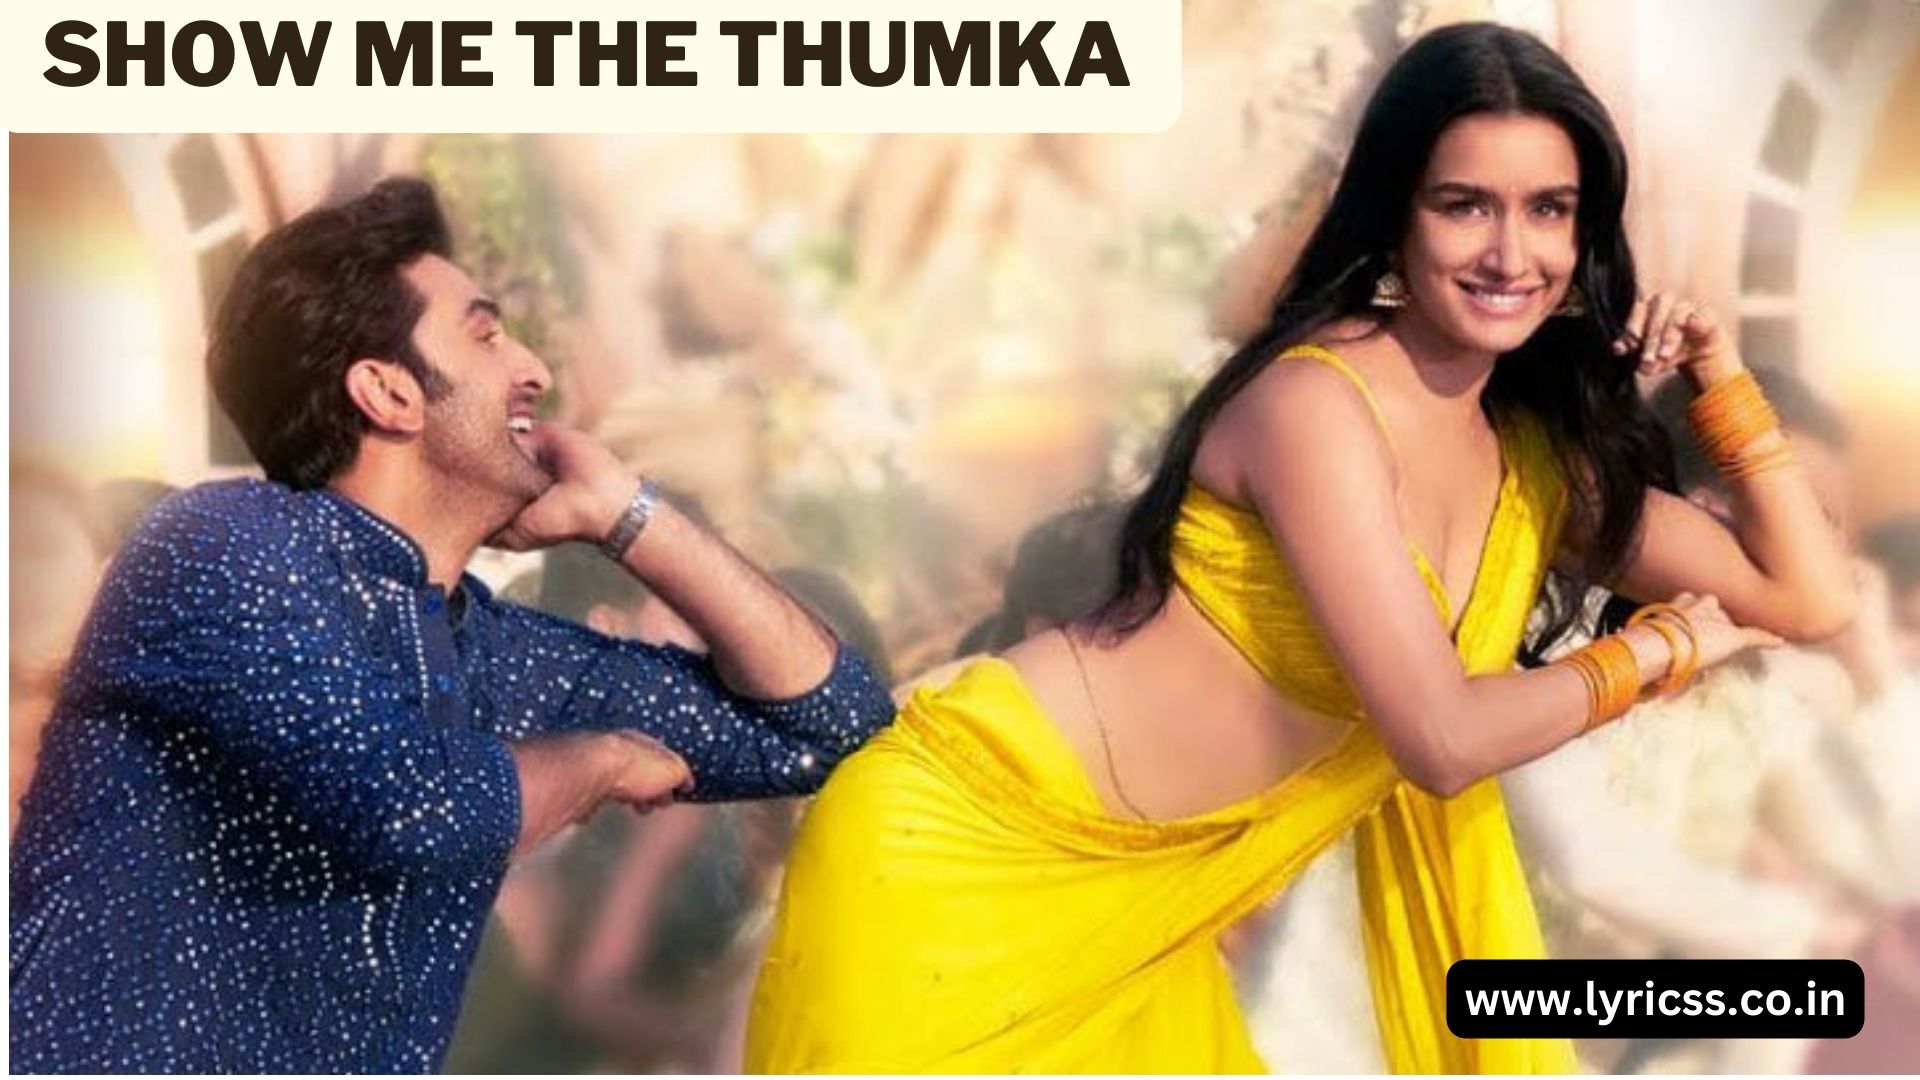 show me the thumka song mp3 download | show me the thumka song lyrics | show me the thumka mp3 download